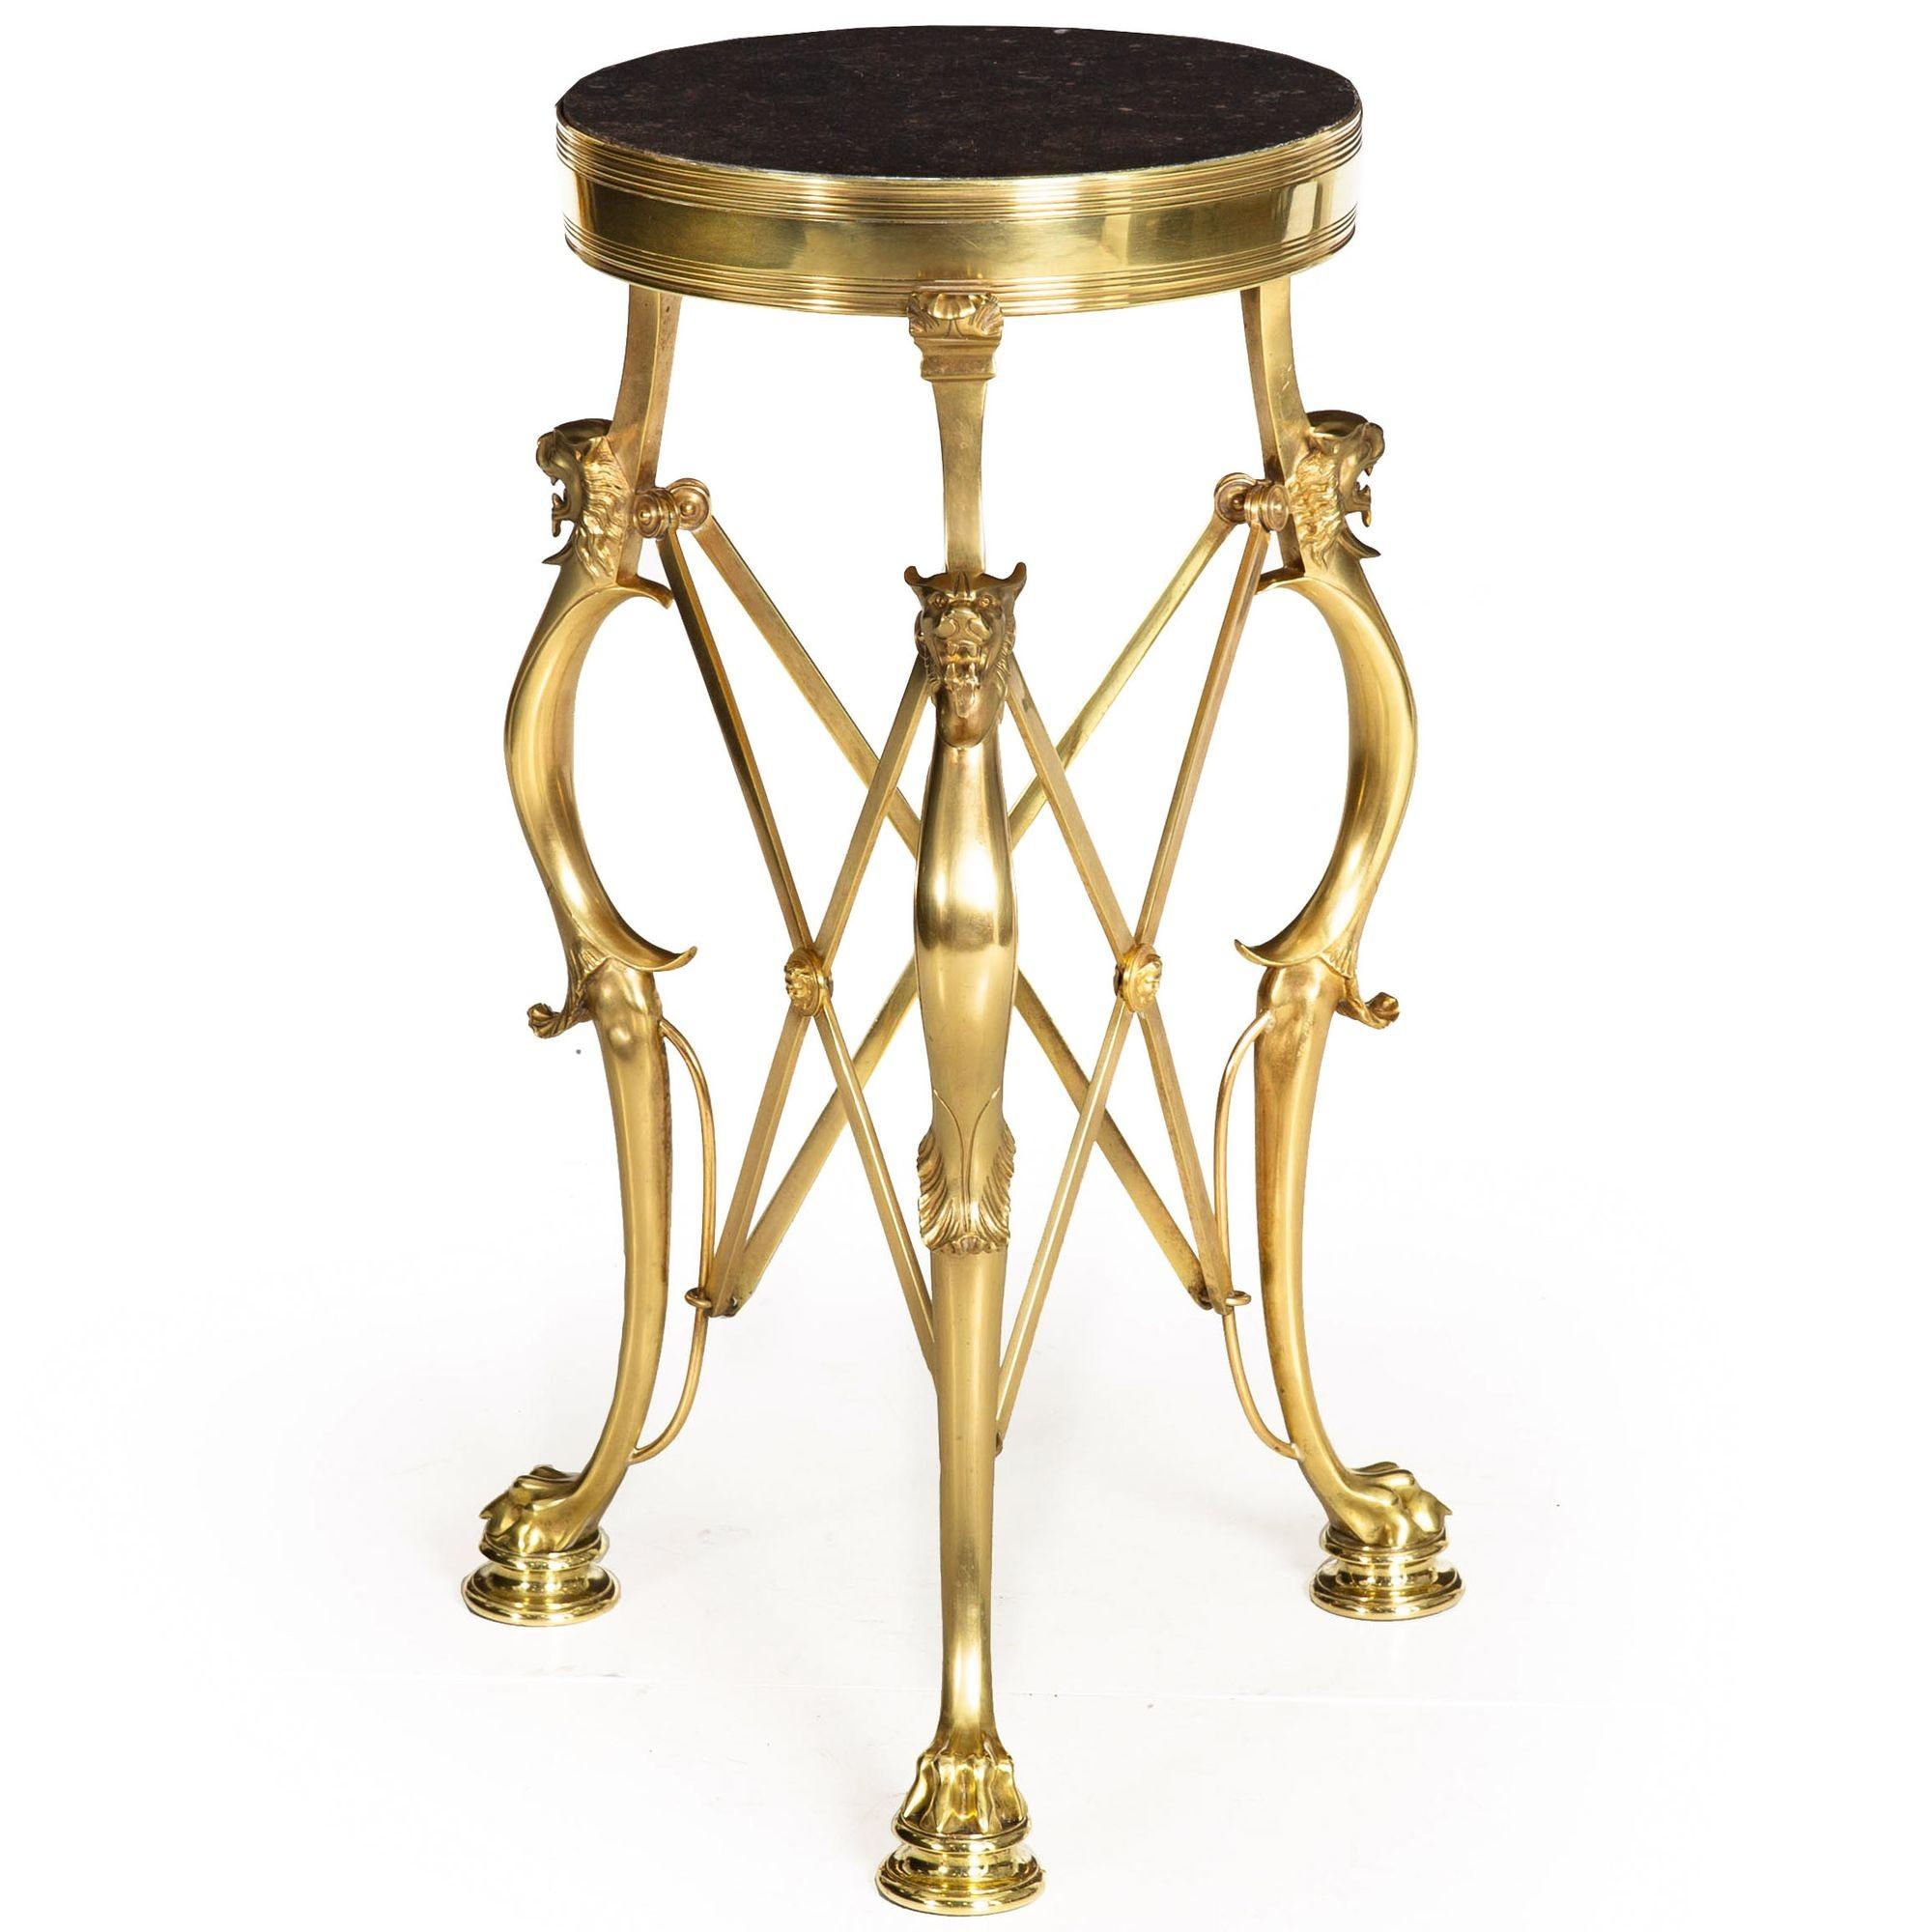 AN EXCEEDINGLY BEAUTIFUL NEO-POMPEIAN POLISHED-BRASS AND MARBLE GUERIDON
With leopard masks and raised on animal paws; France, circa 1890
Item # 402PZW06W

This gueridon table is a fine example that reflects the Neo-Pompeian style of antiquity. Its